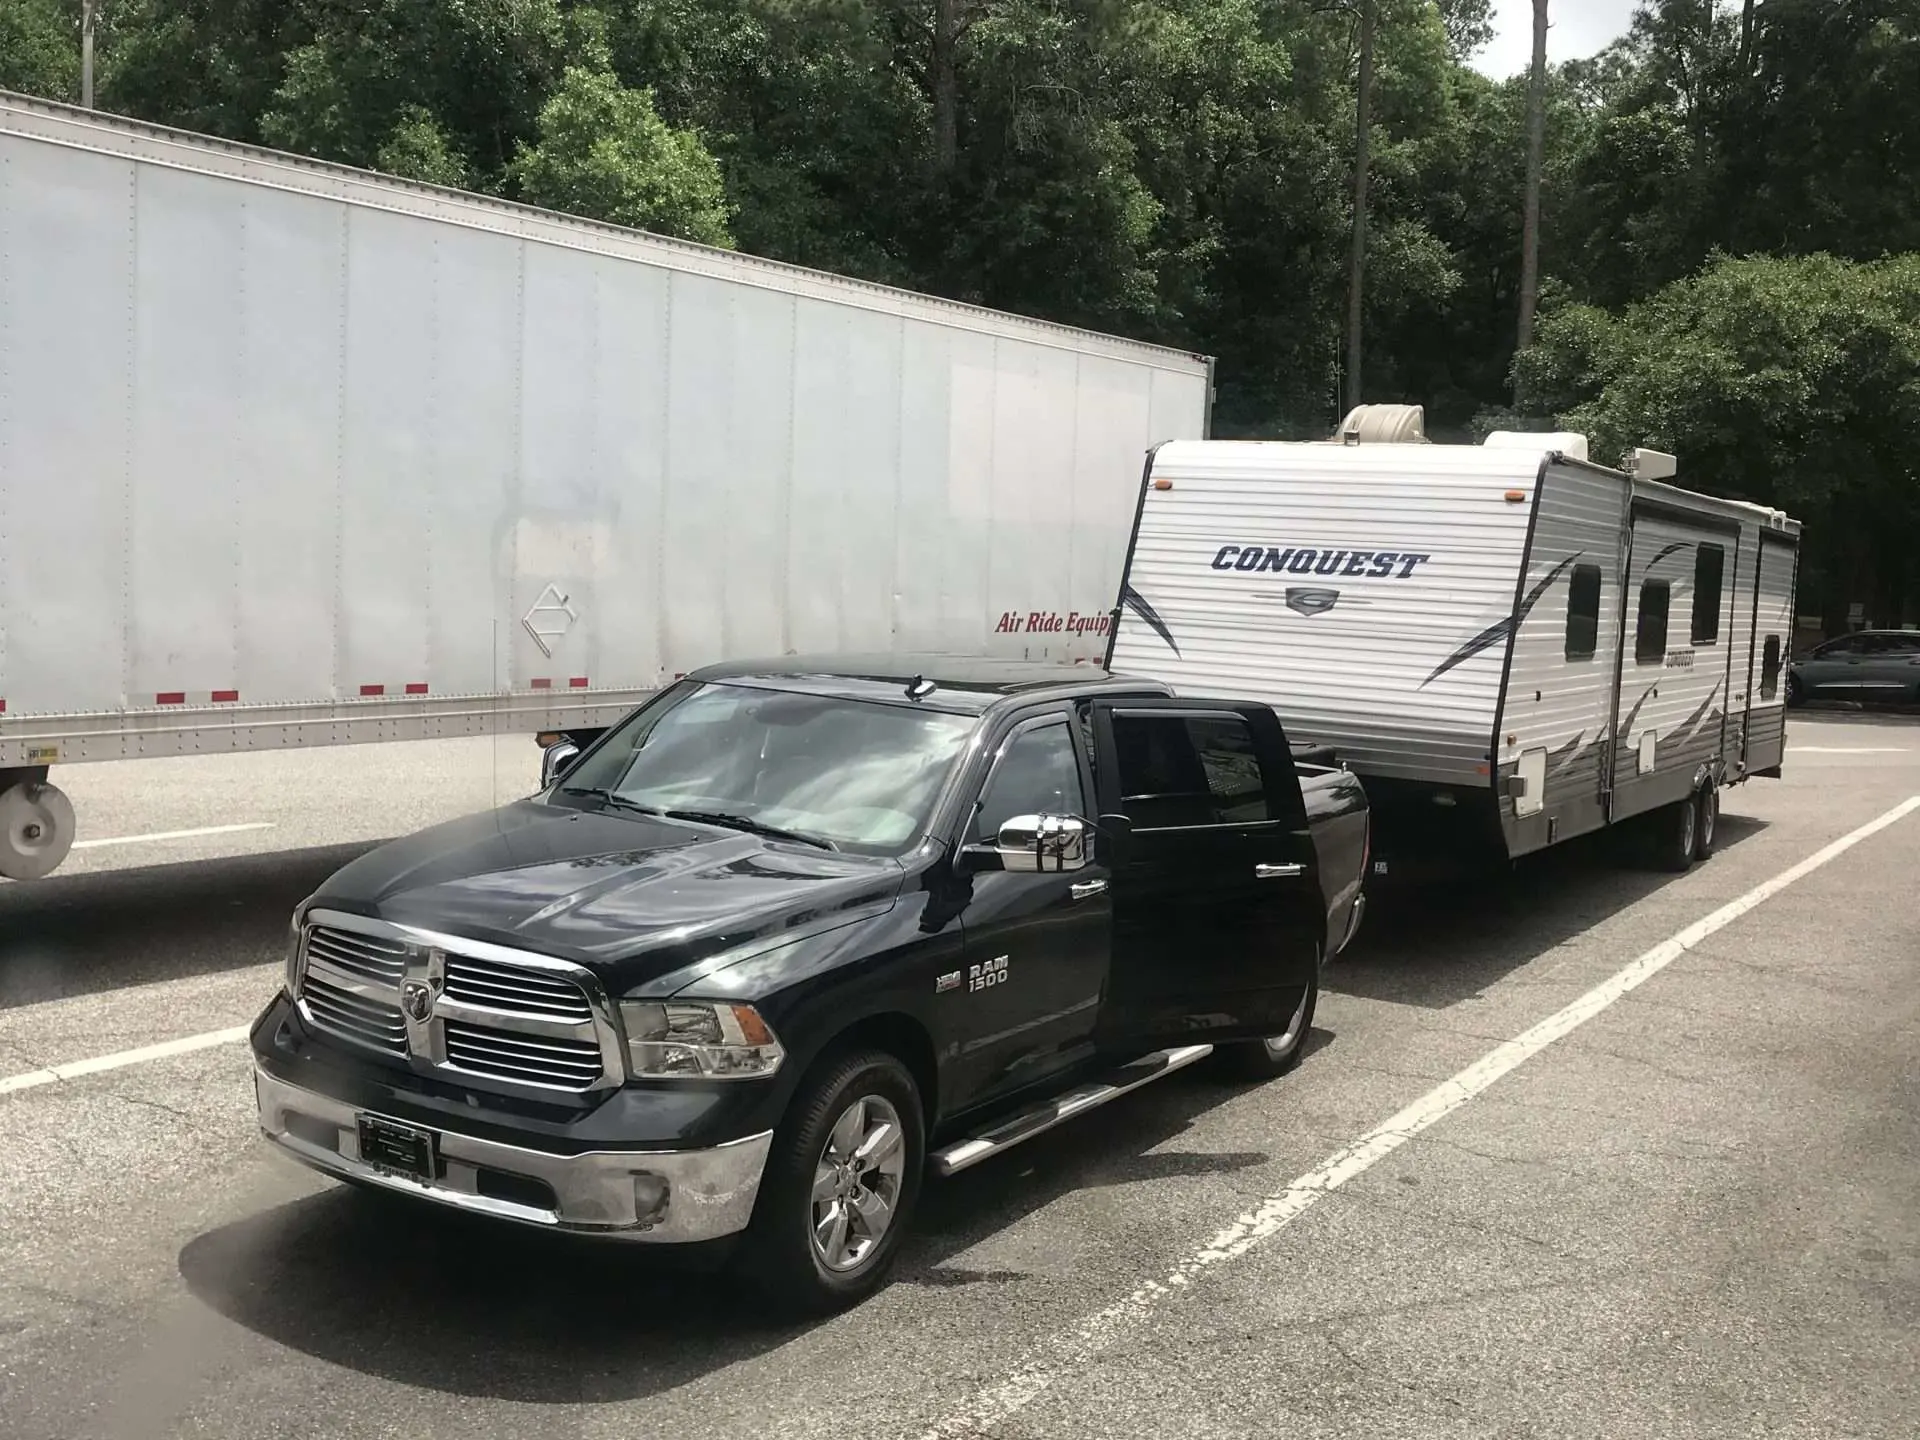 RV parked next to truck at rest stop